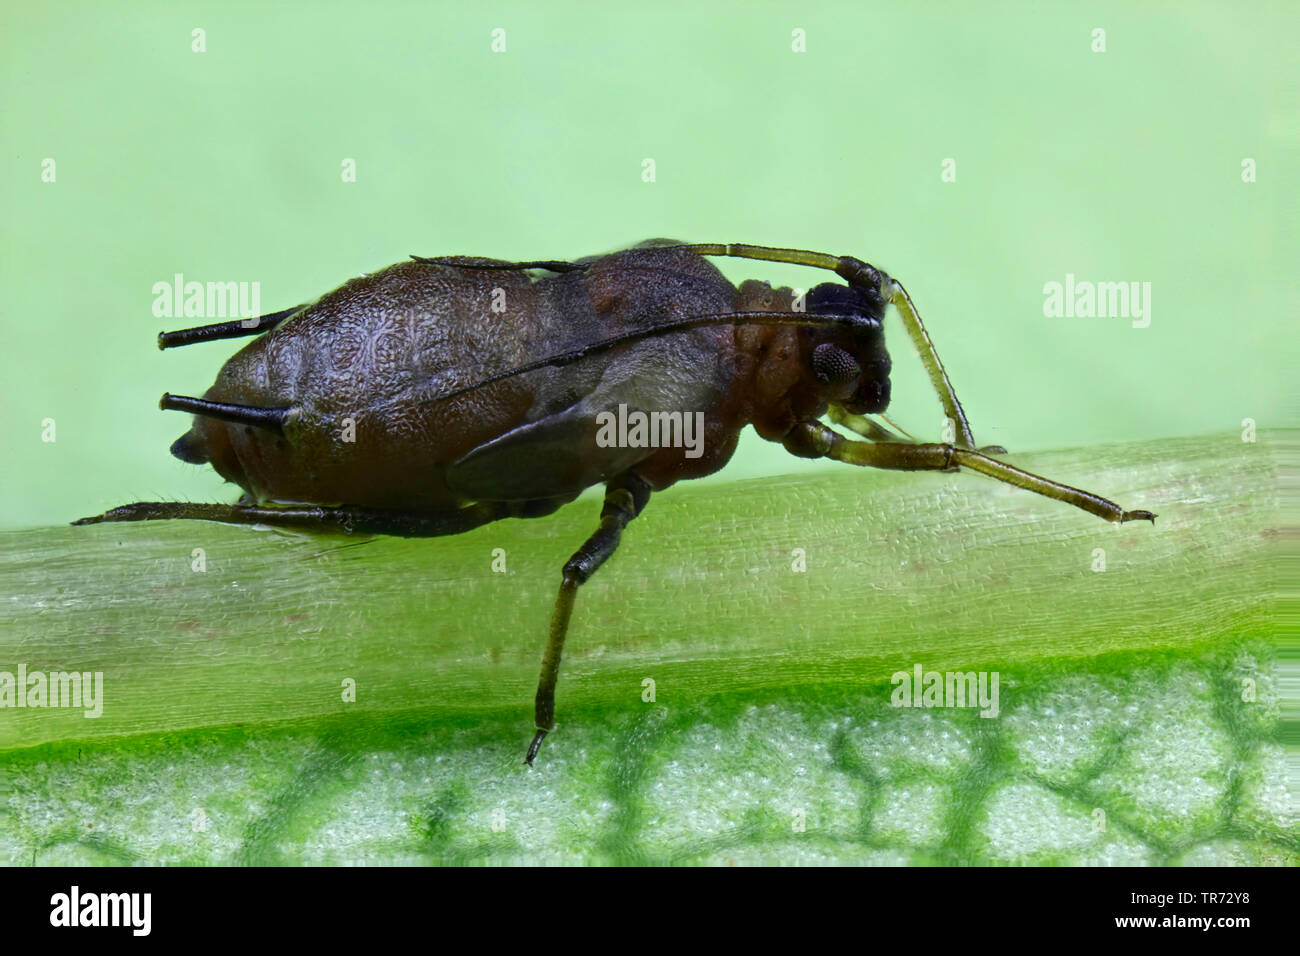 aphids (Aphidoidea), aphid on a leaf, closeup, Germany Stock Photo